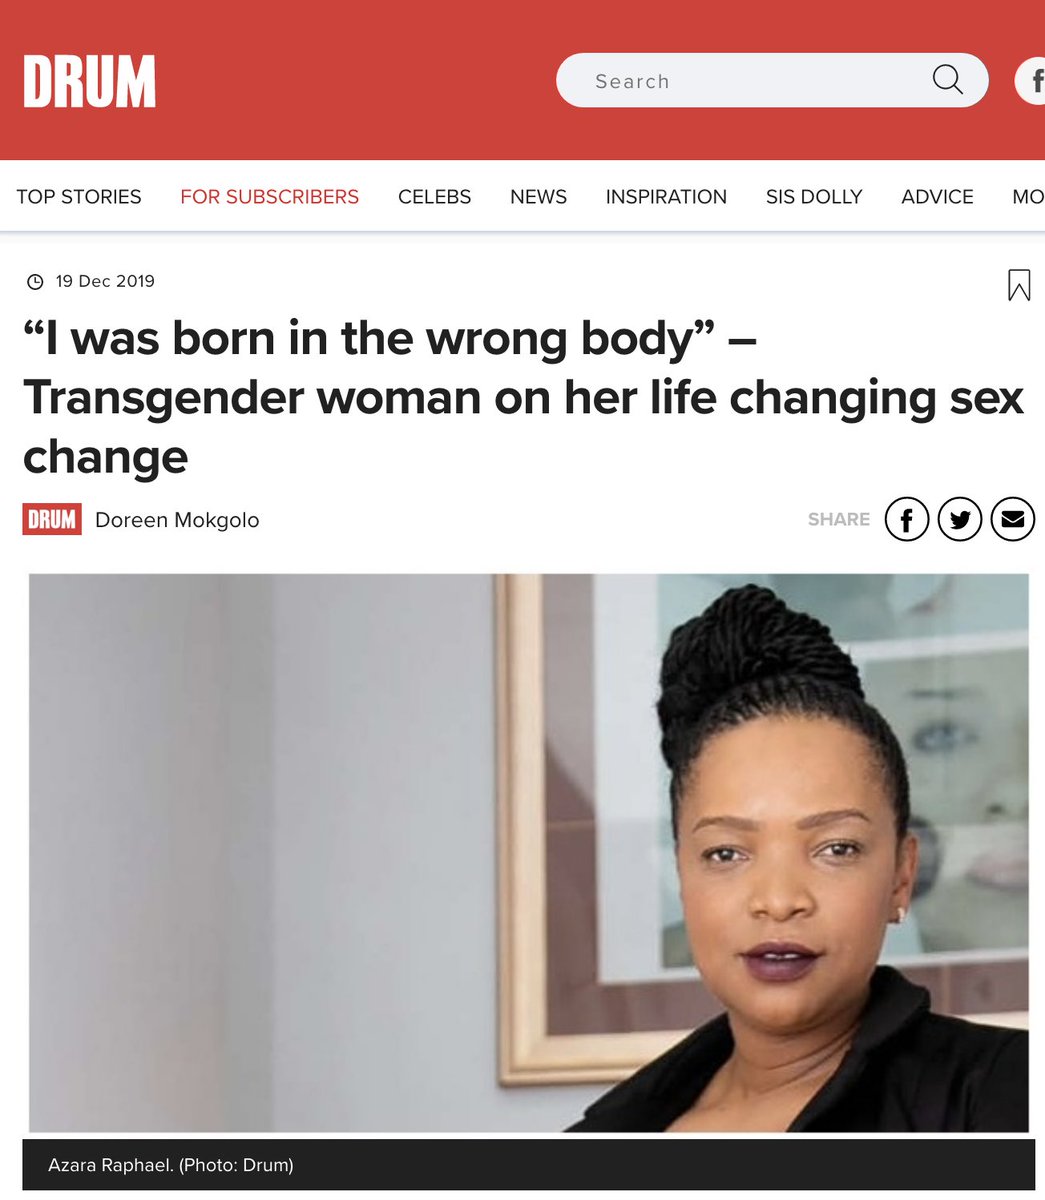  http://News24.com  https://www.news24.com/drum/Advice/i-was-born-in-the-wrong-body-transgender-woman-on-her-life-changing-sex-change-20191216